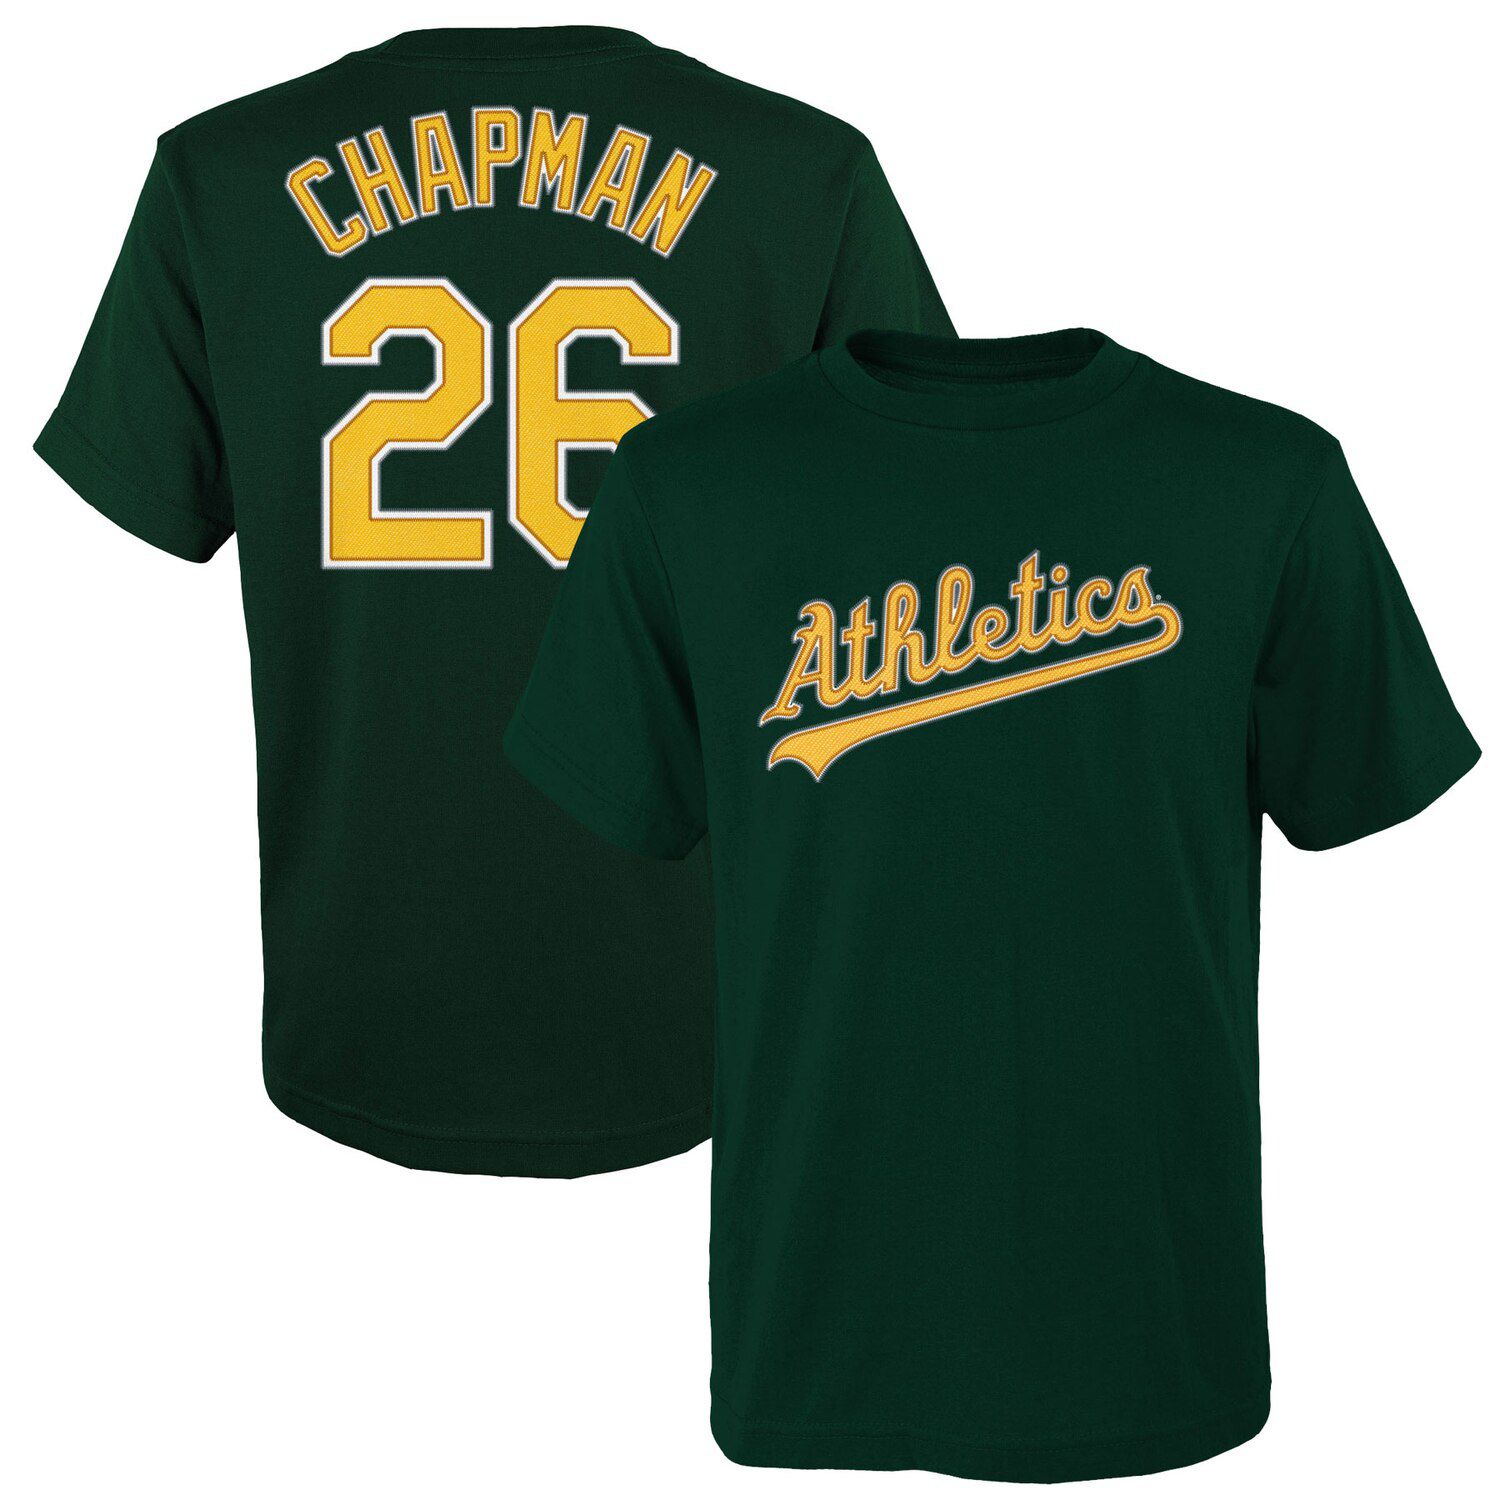 oakland a's youth jersey